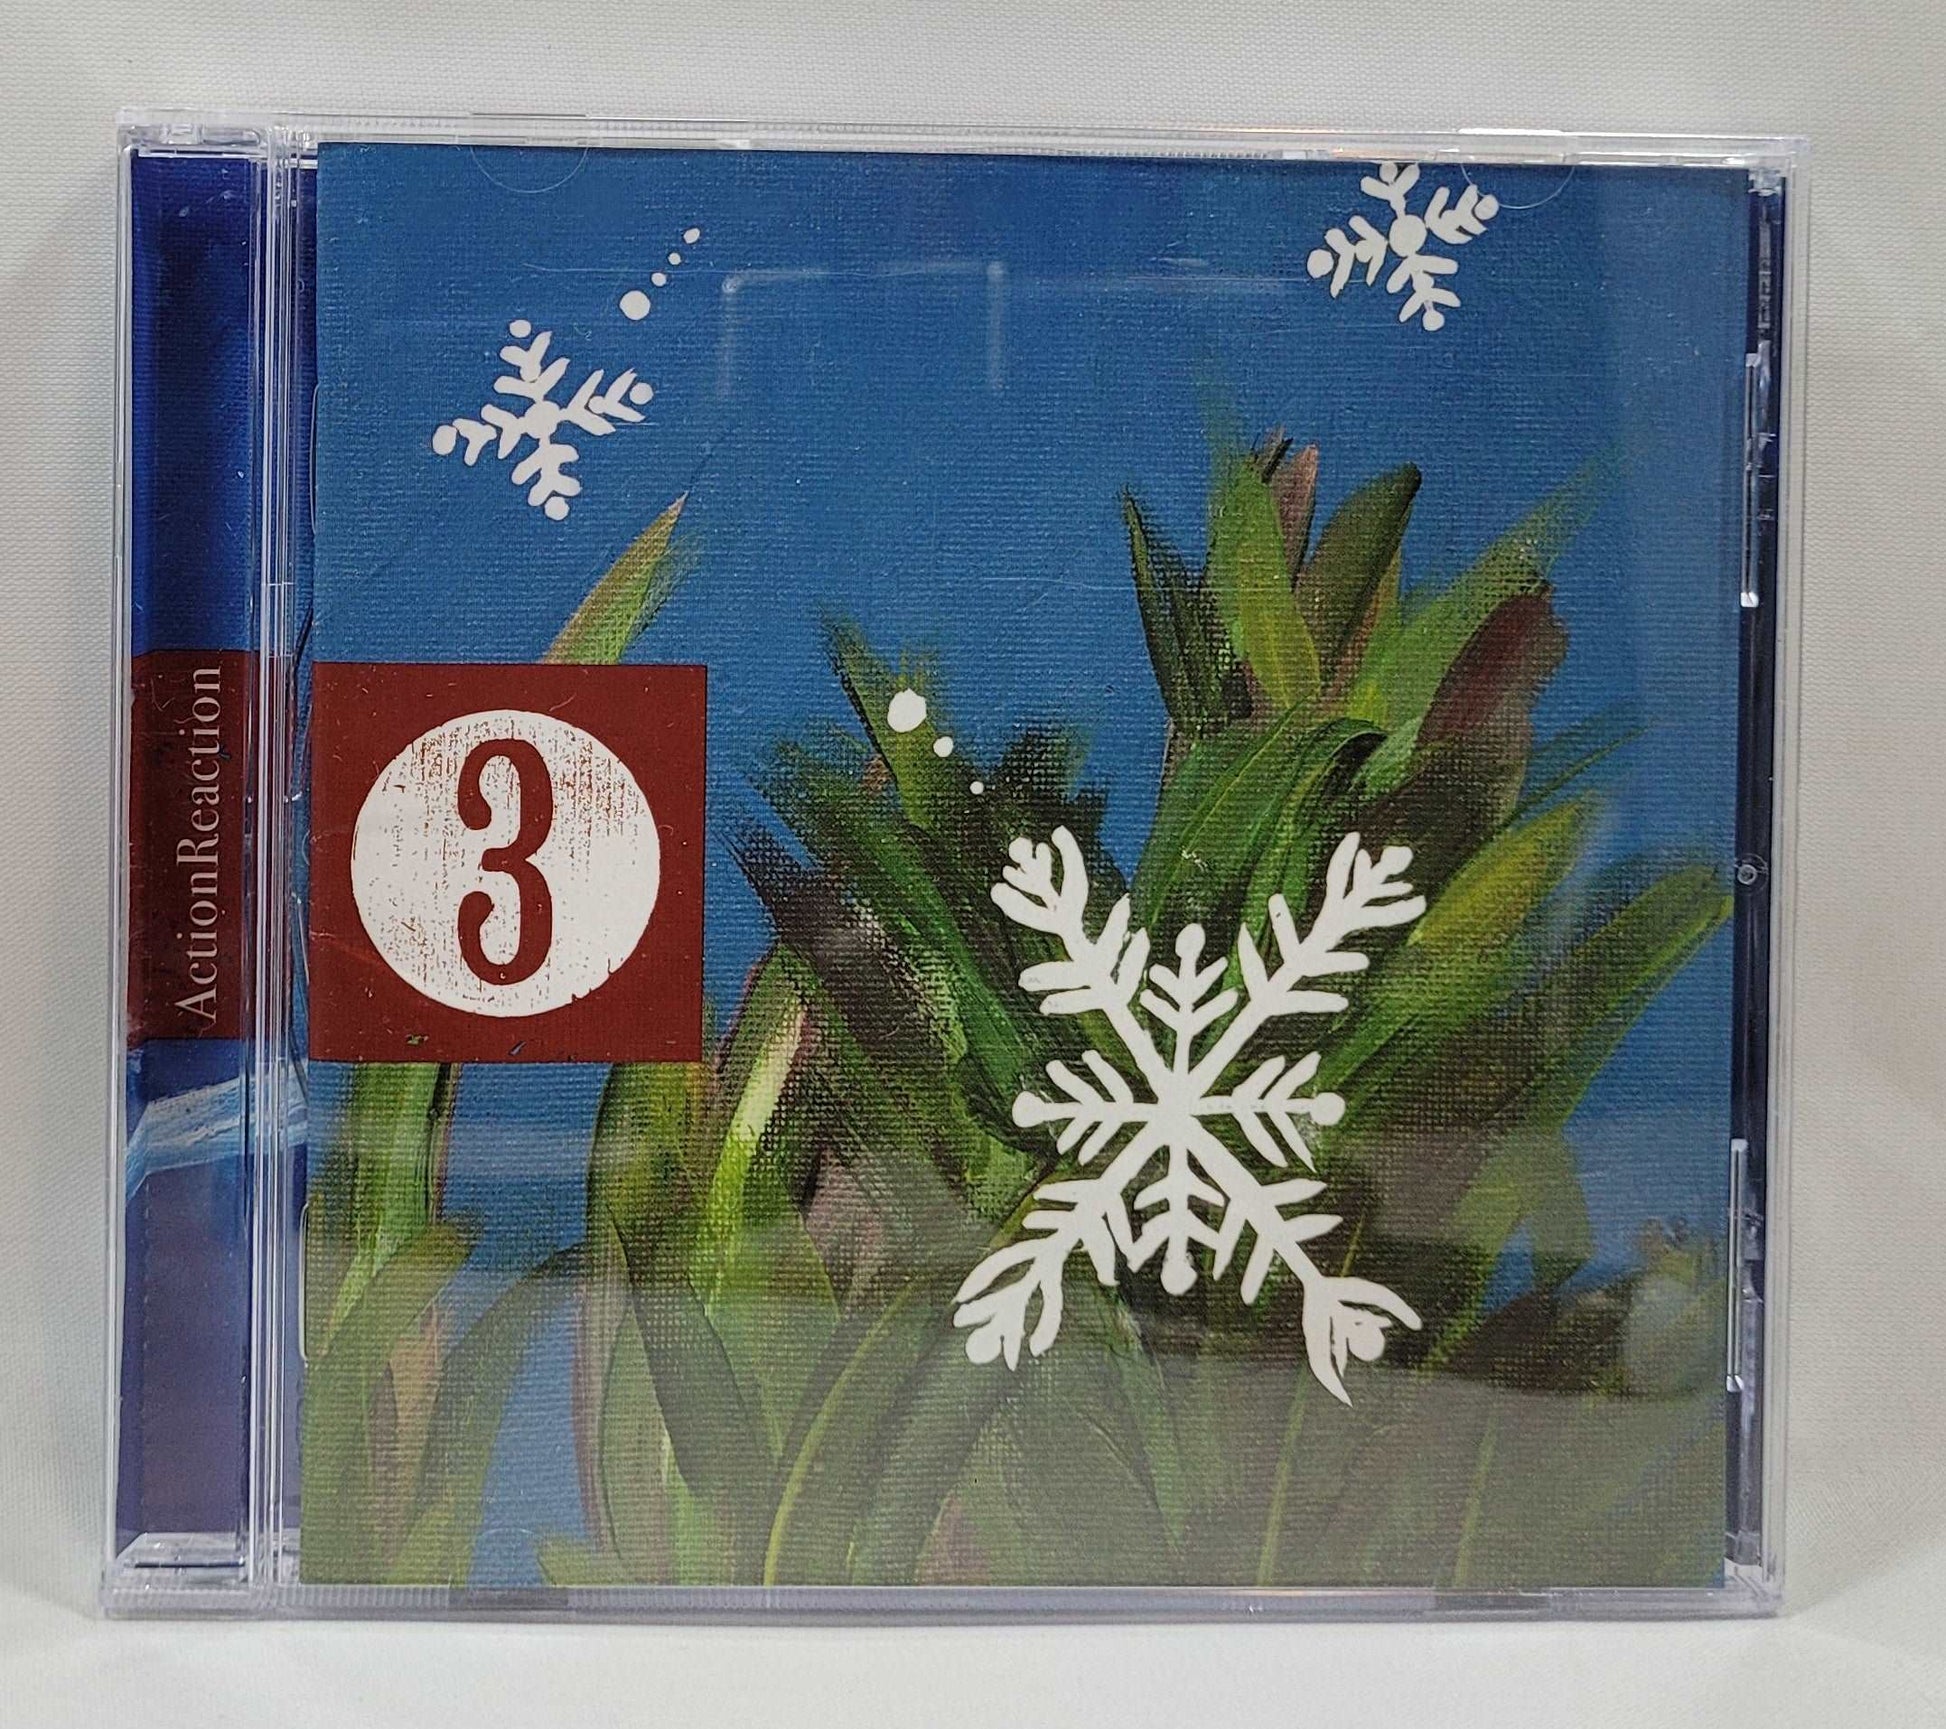 ActionReaction - 3 Is the Magic Number [2006 Used CD]